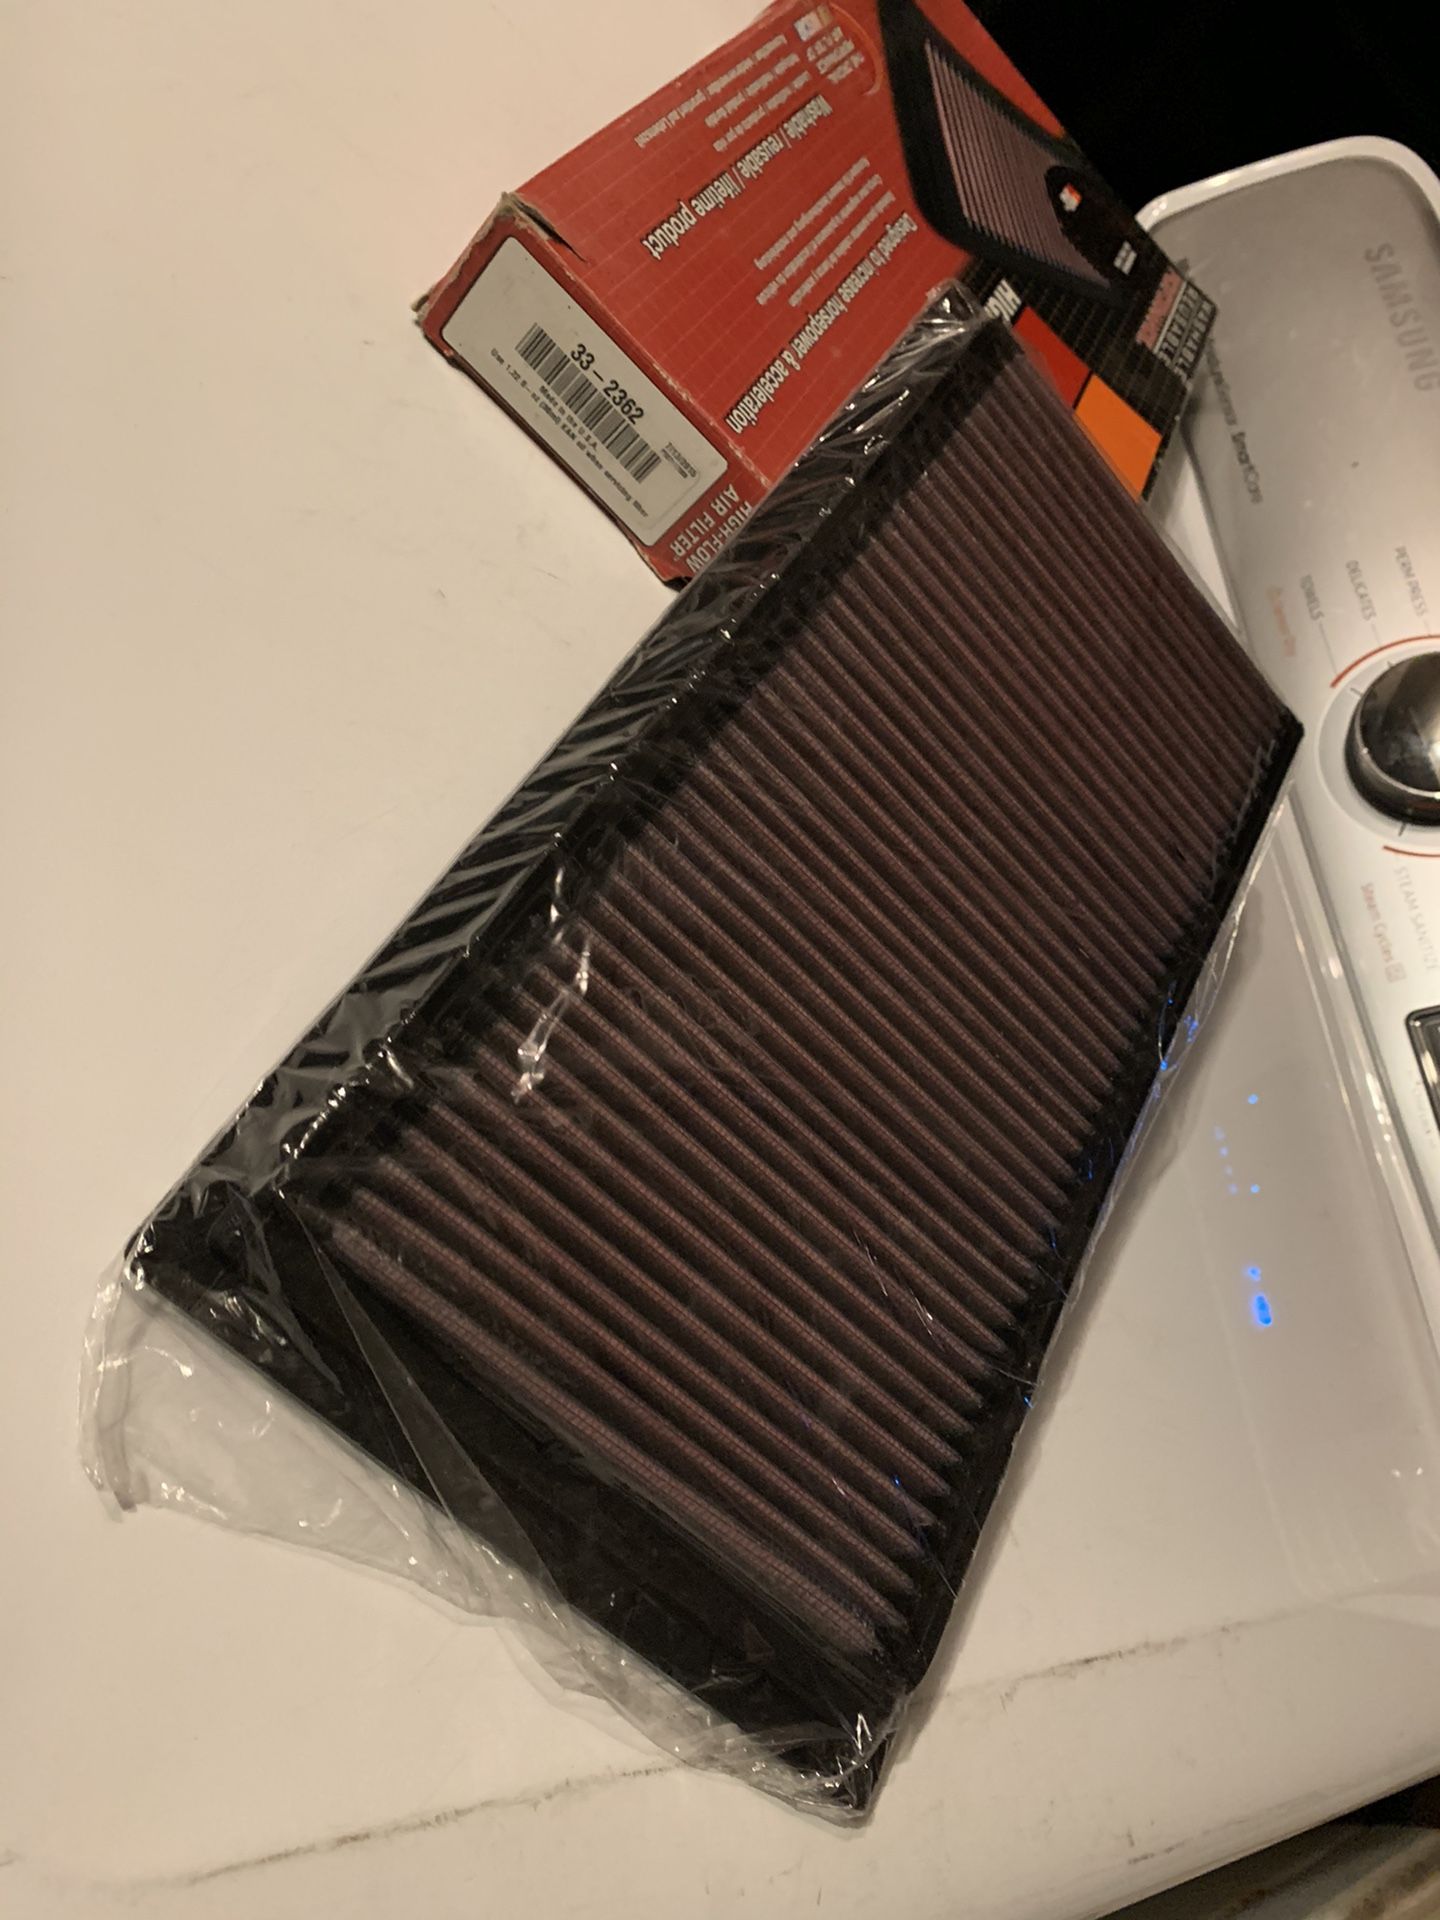 K&N filter brand new for dodge and Jeep